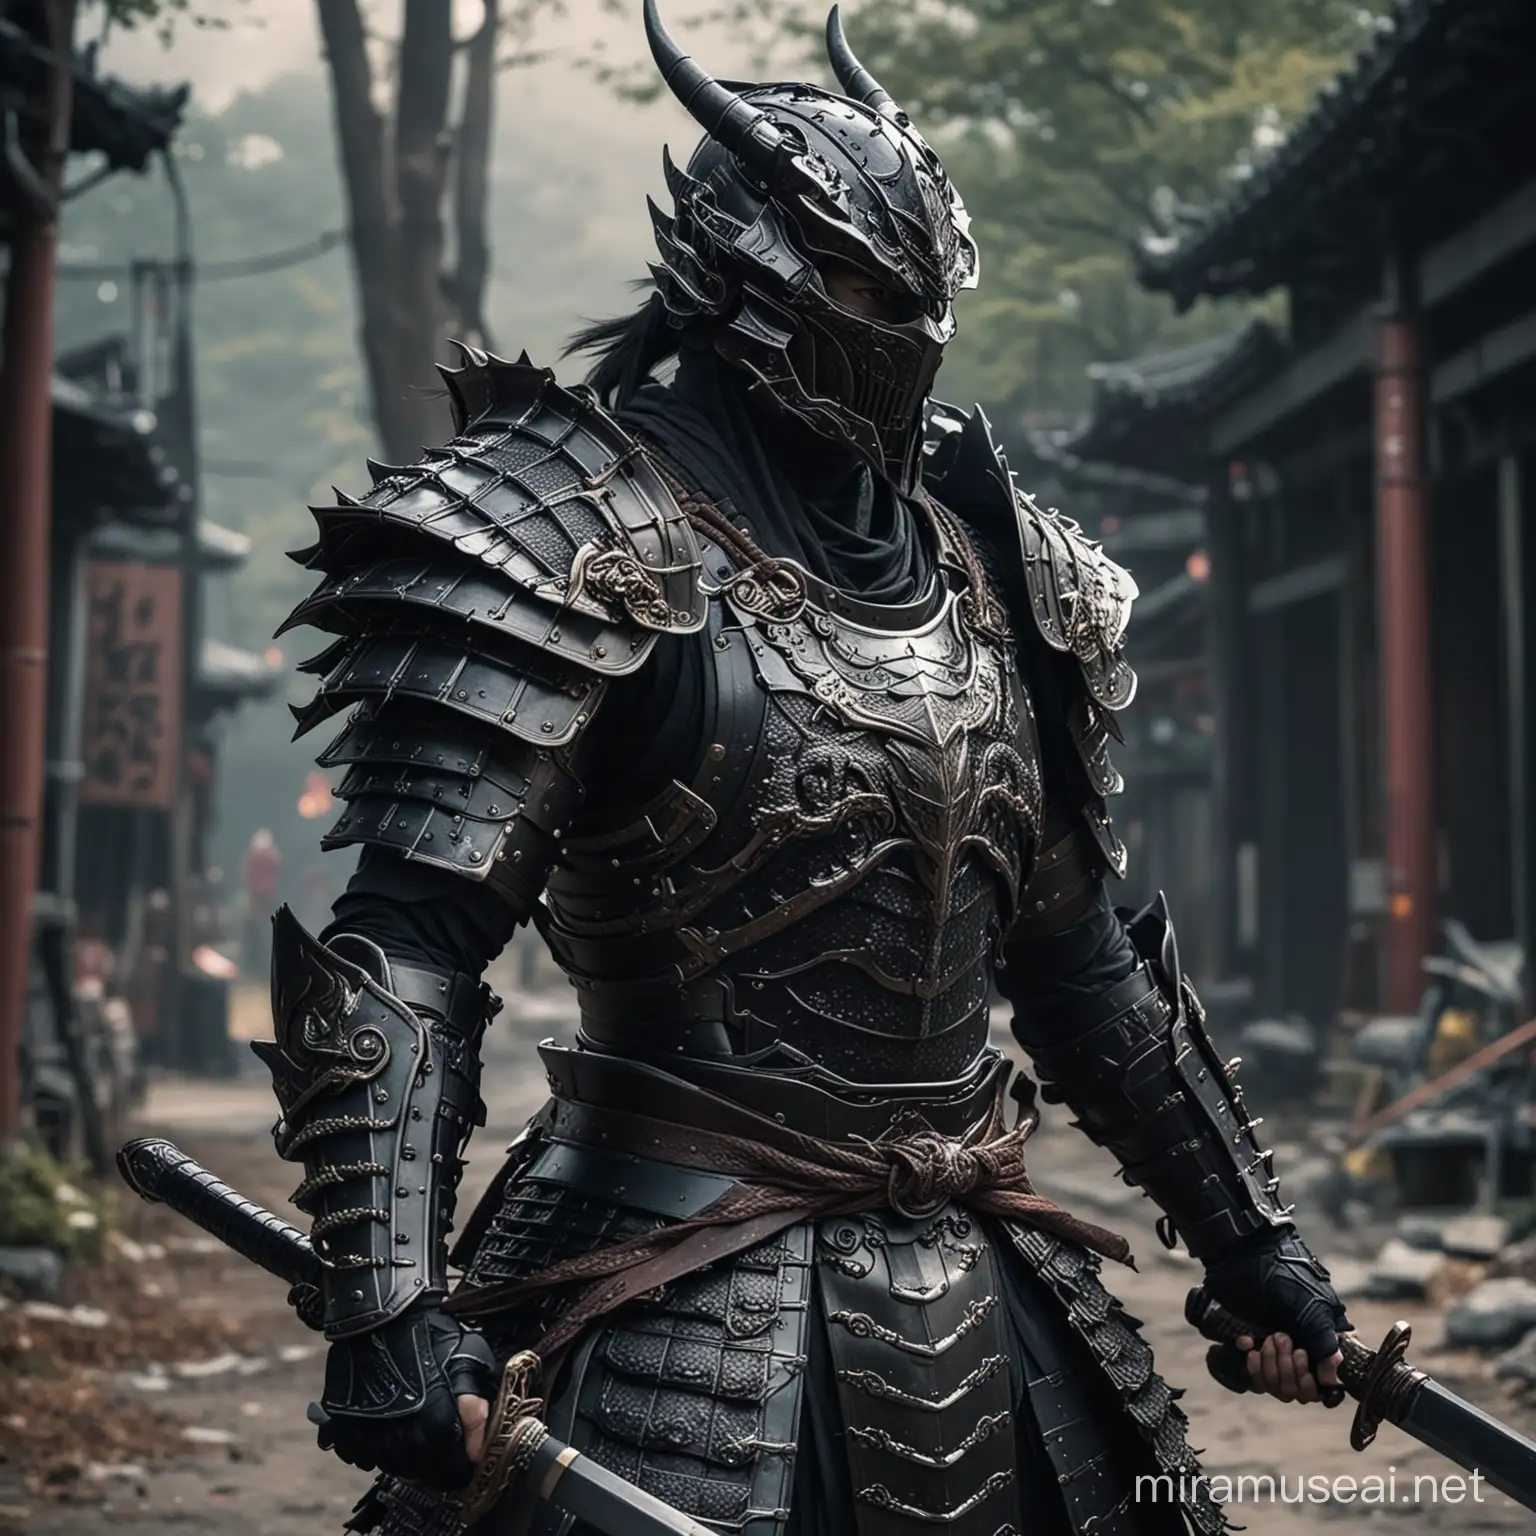 samurai cyborg wear a black armor, dragon pattern armor, fight an  death army, wide angle photoshoot, big shoulder, hold a big sword, realistic armor, steel armor, details on armor , details in face,  complex design, cinematic lighting, cinematic color, d.o.f, fight in broken city, dark scene, 